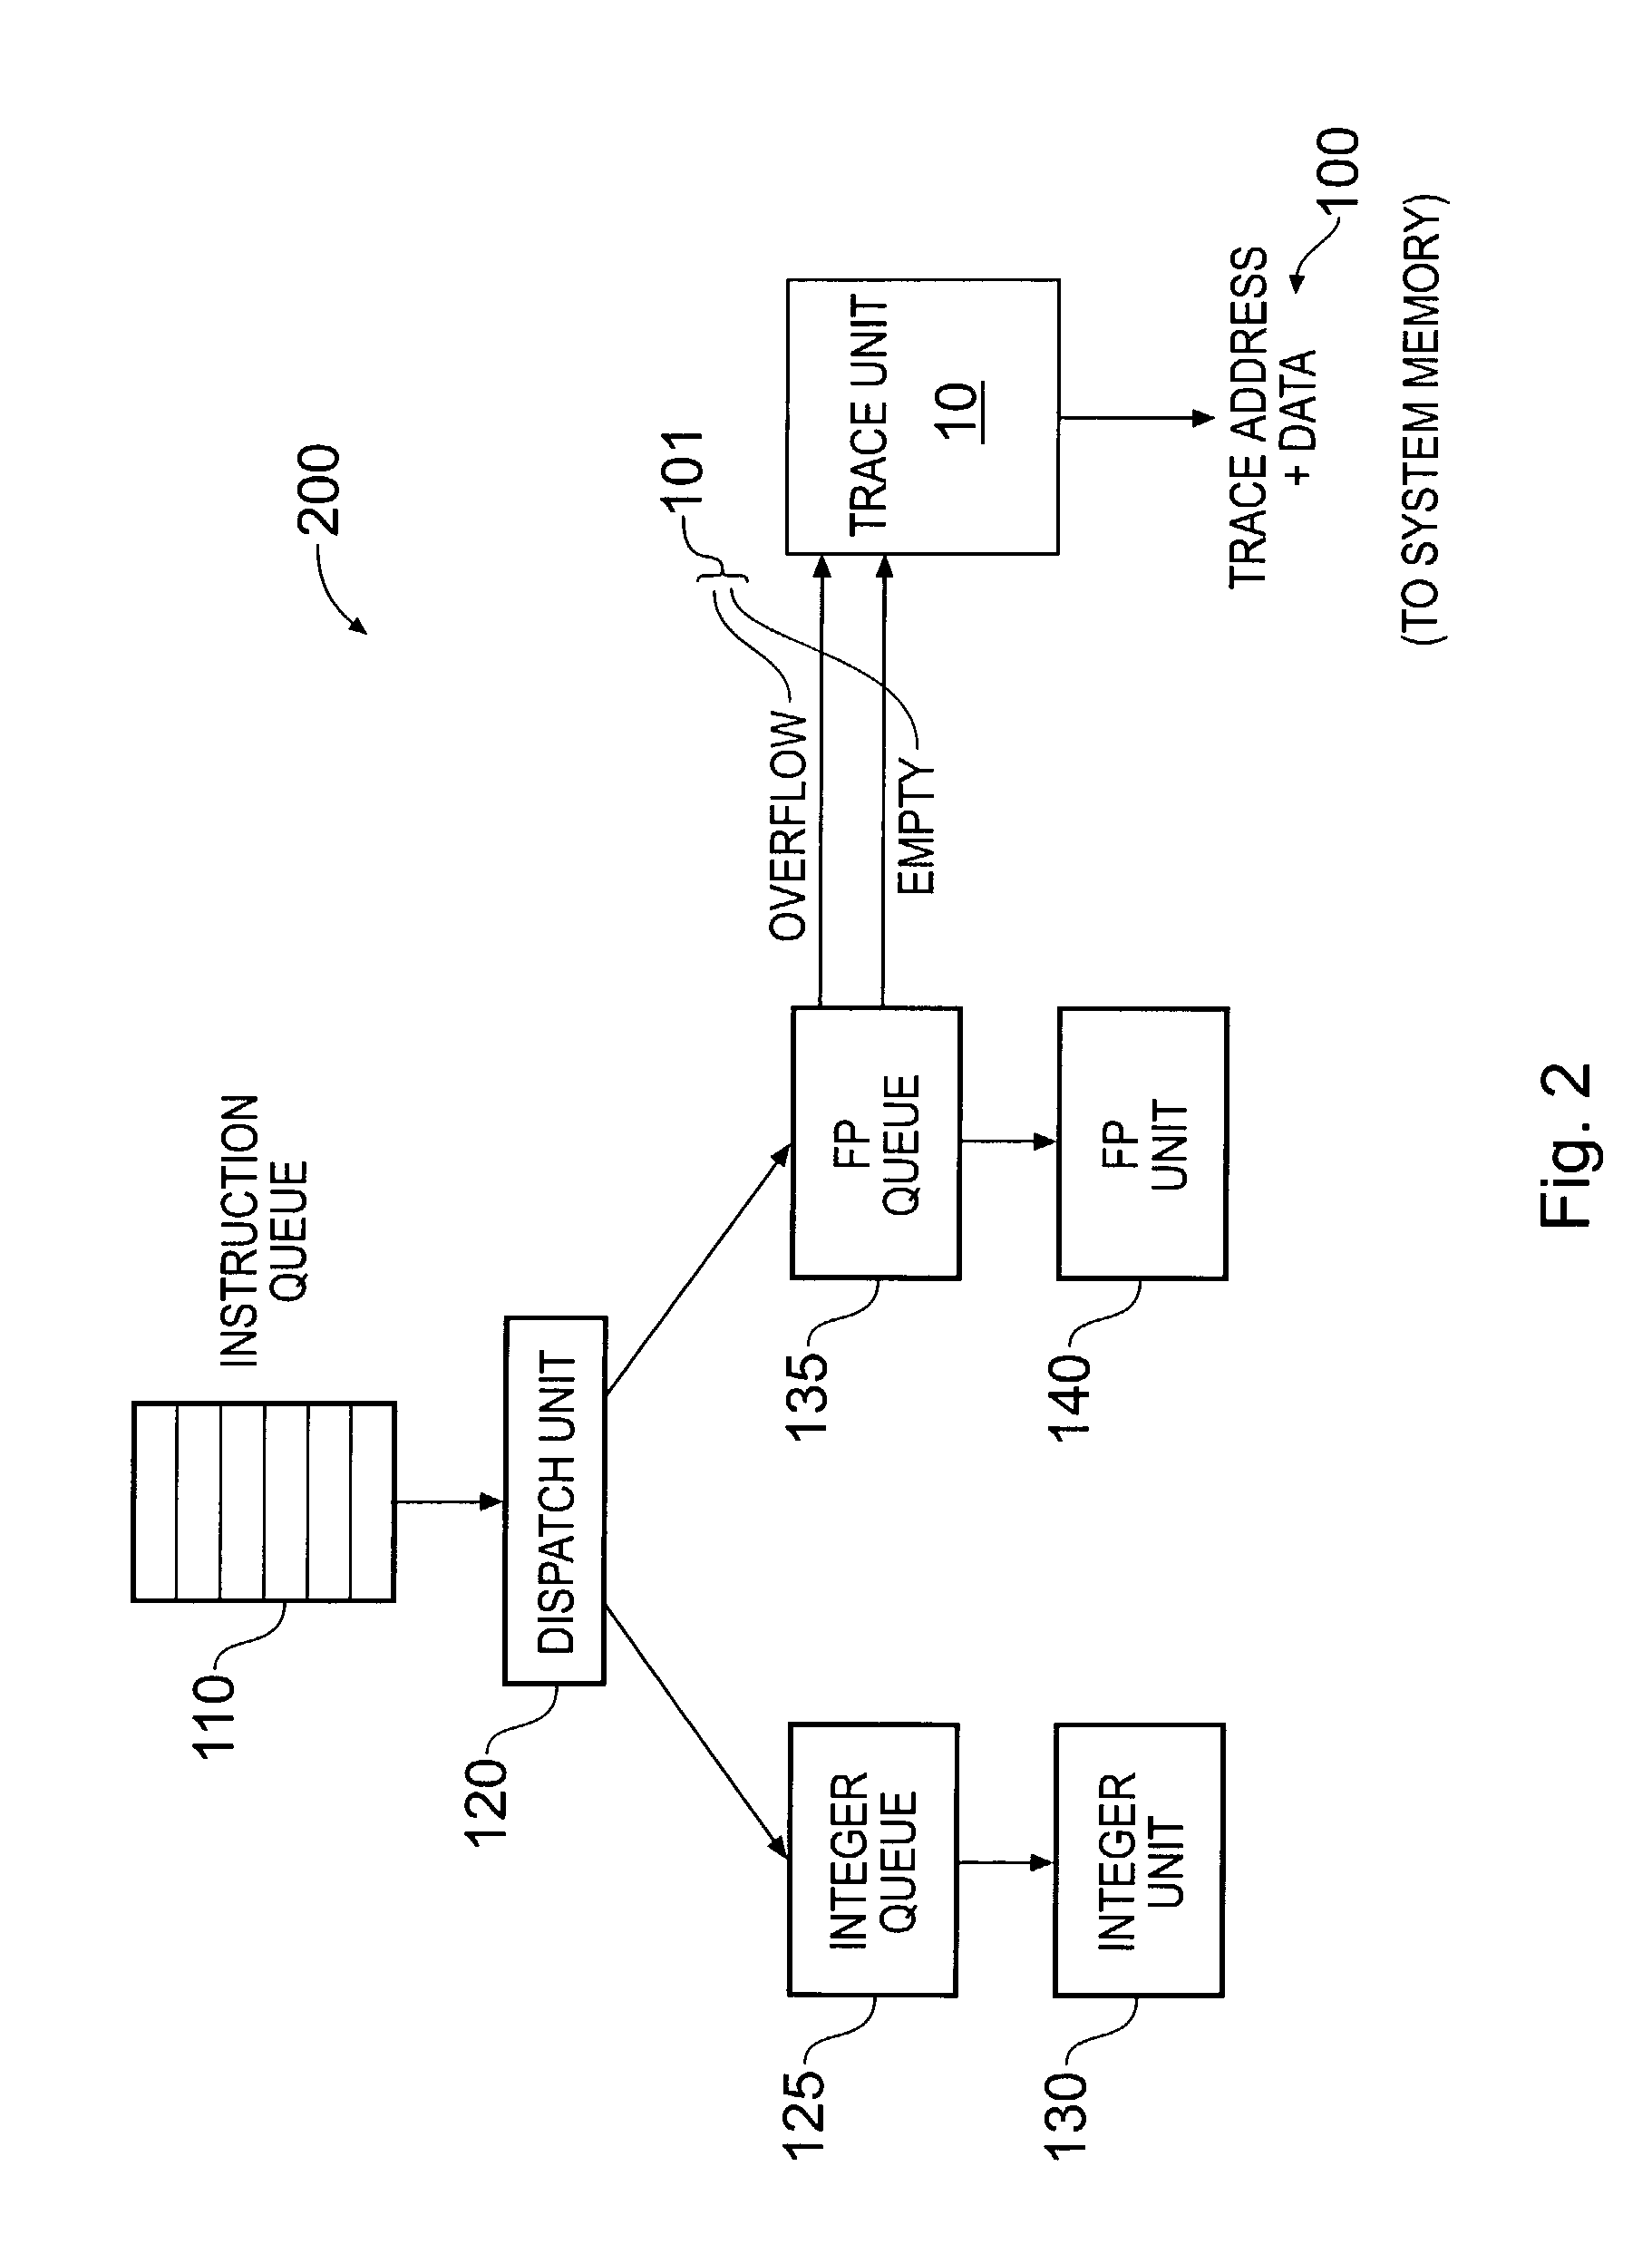 System and method for generating trace data in a computing system